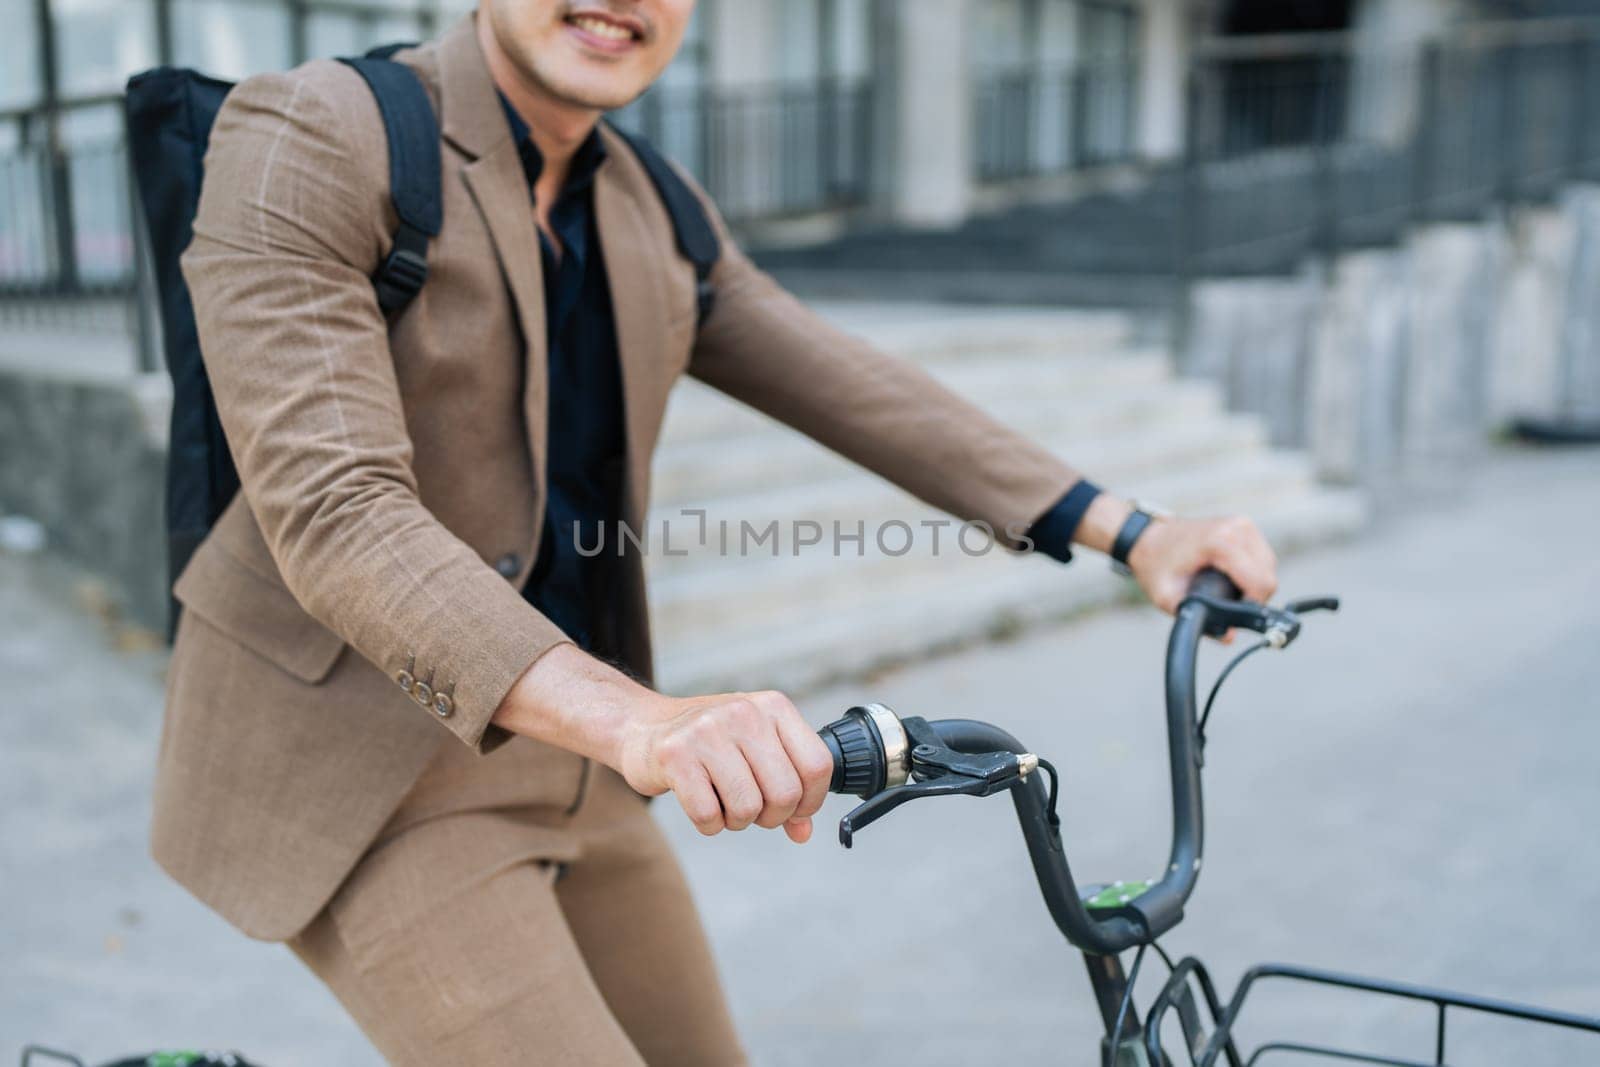 Young businessman in suit in city bike to work eco friendly alternative vehicle green energy.